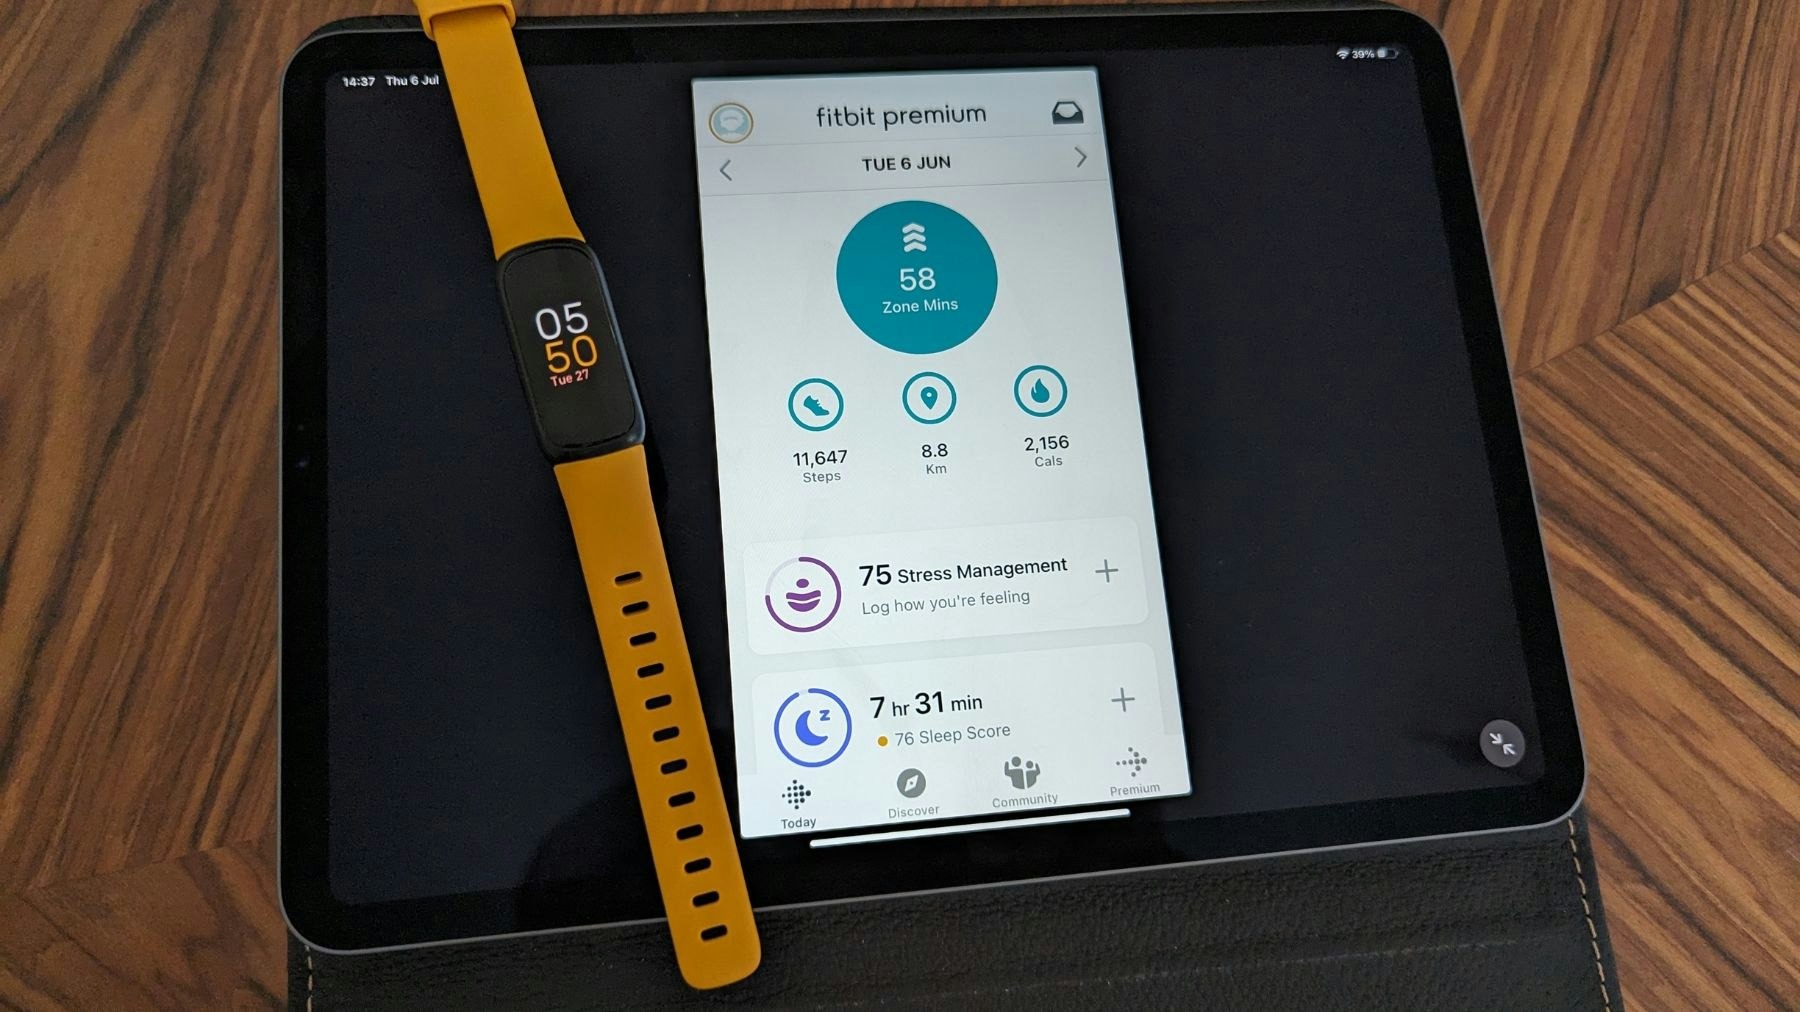 Fitbit Inspire 3 and Fitbit app